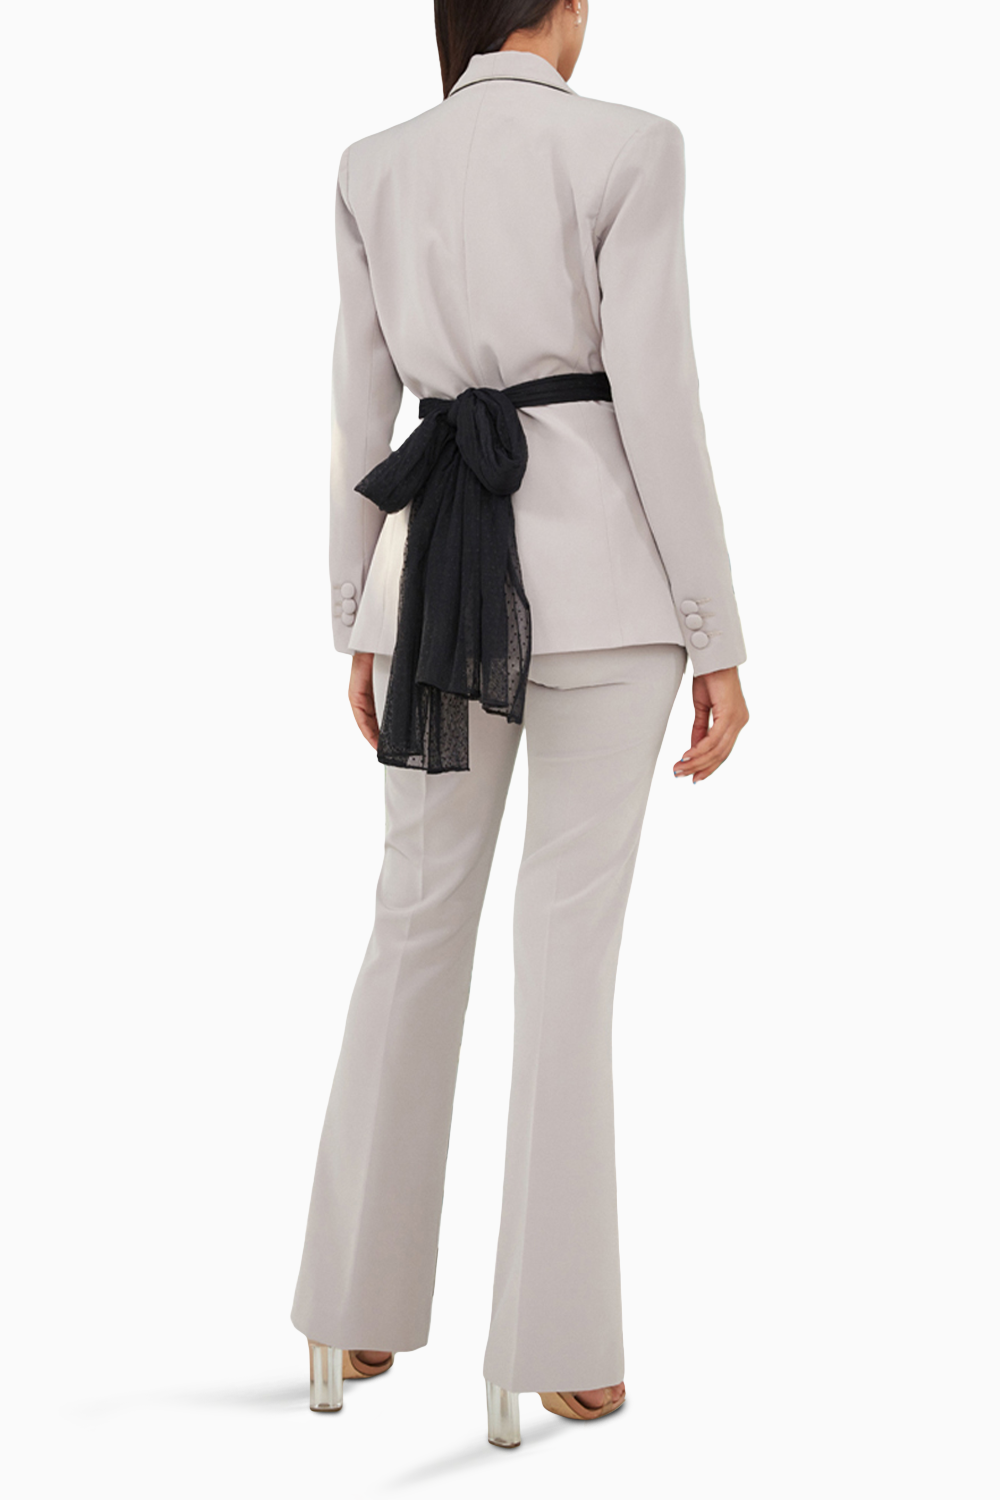 Grey knot Blazer suit with Tassels Detailing